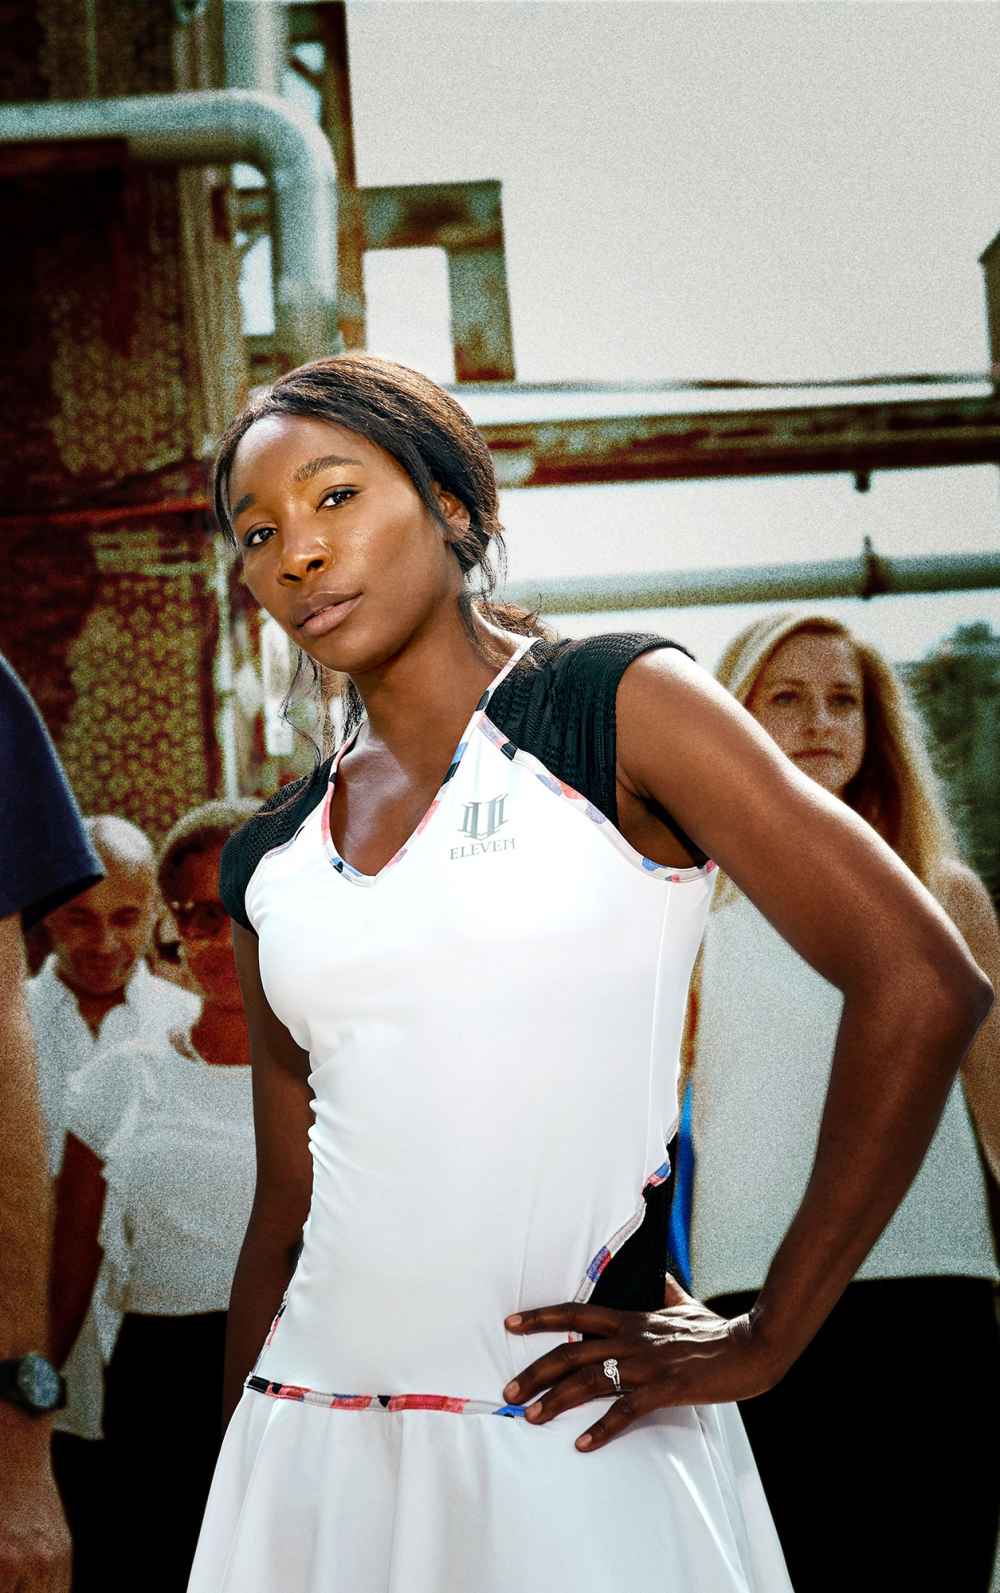 Venus Williams' Isola Athleisure Collection Just Dropped, See Our Favorite Pieces